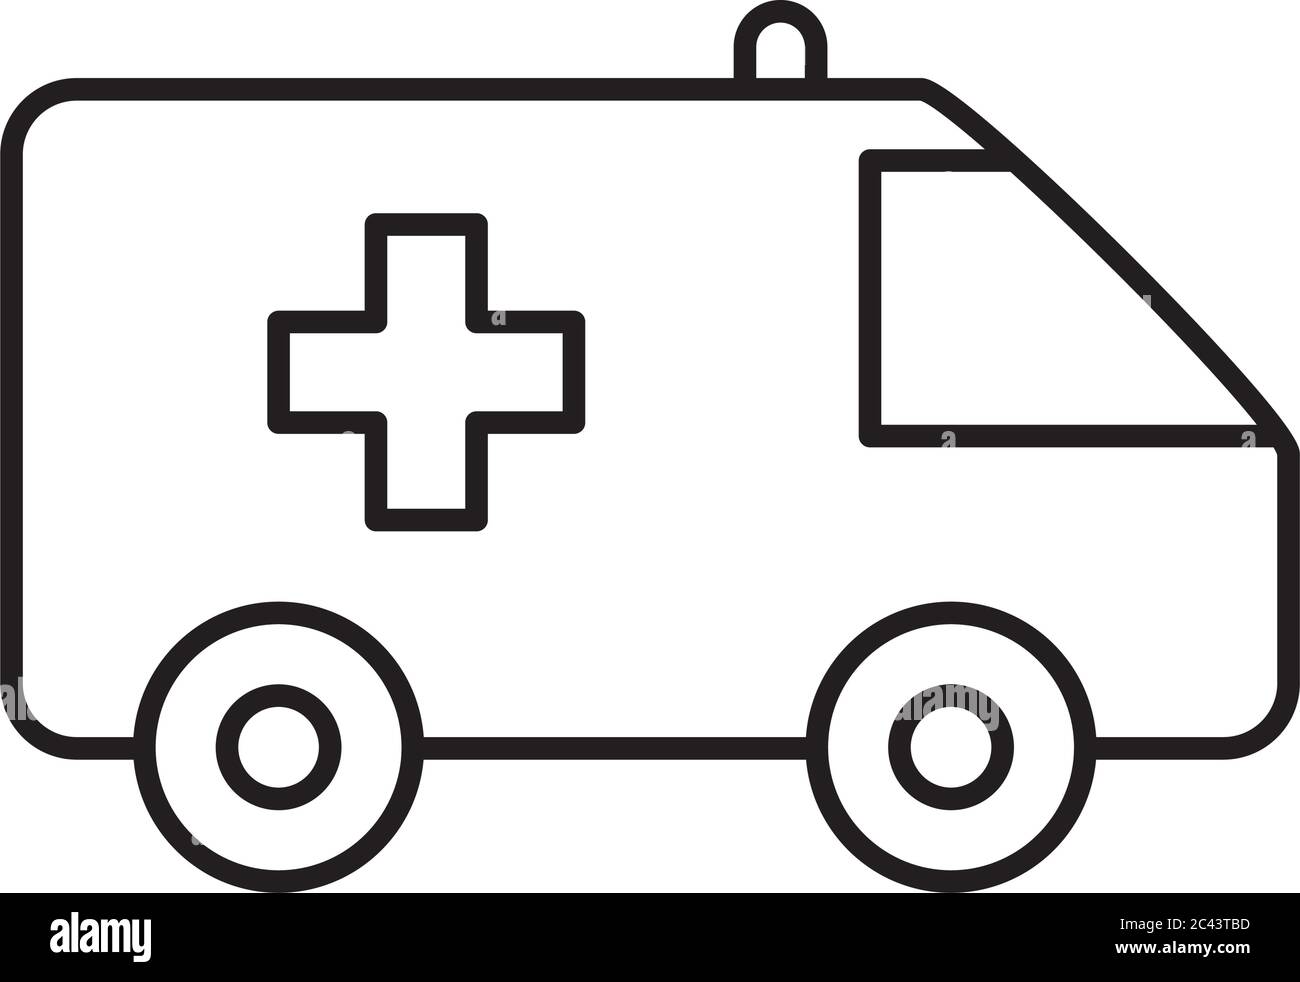 medical ambulance icon over white background, line style, vector illustration Stock Vector